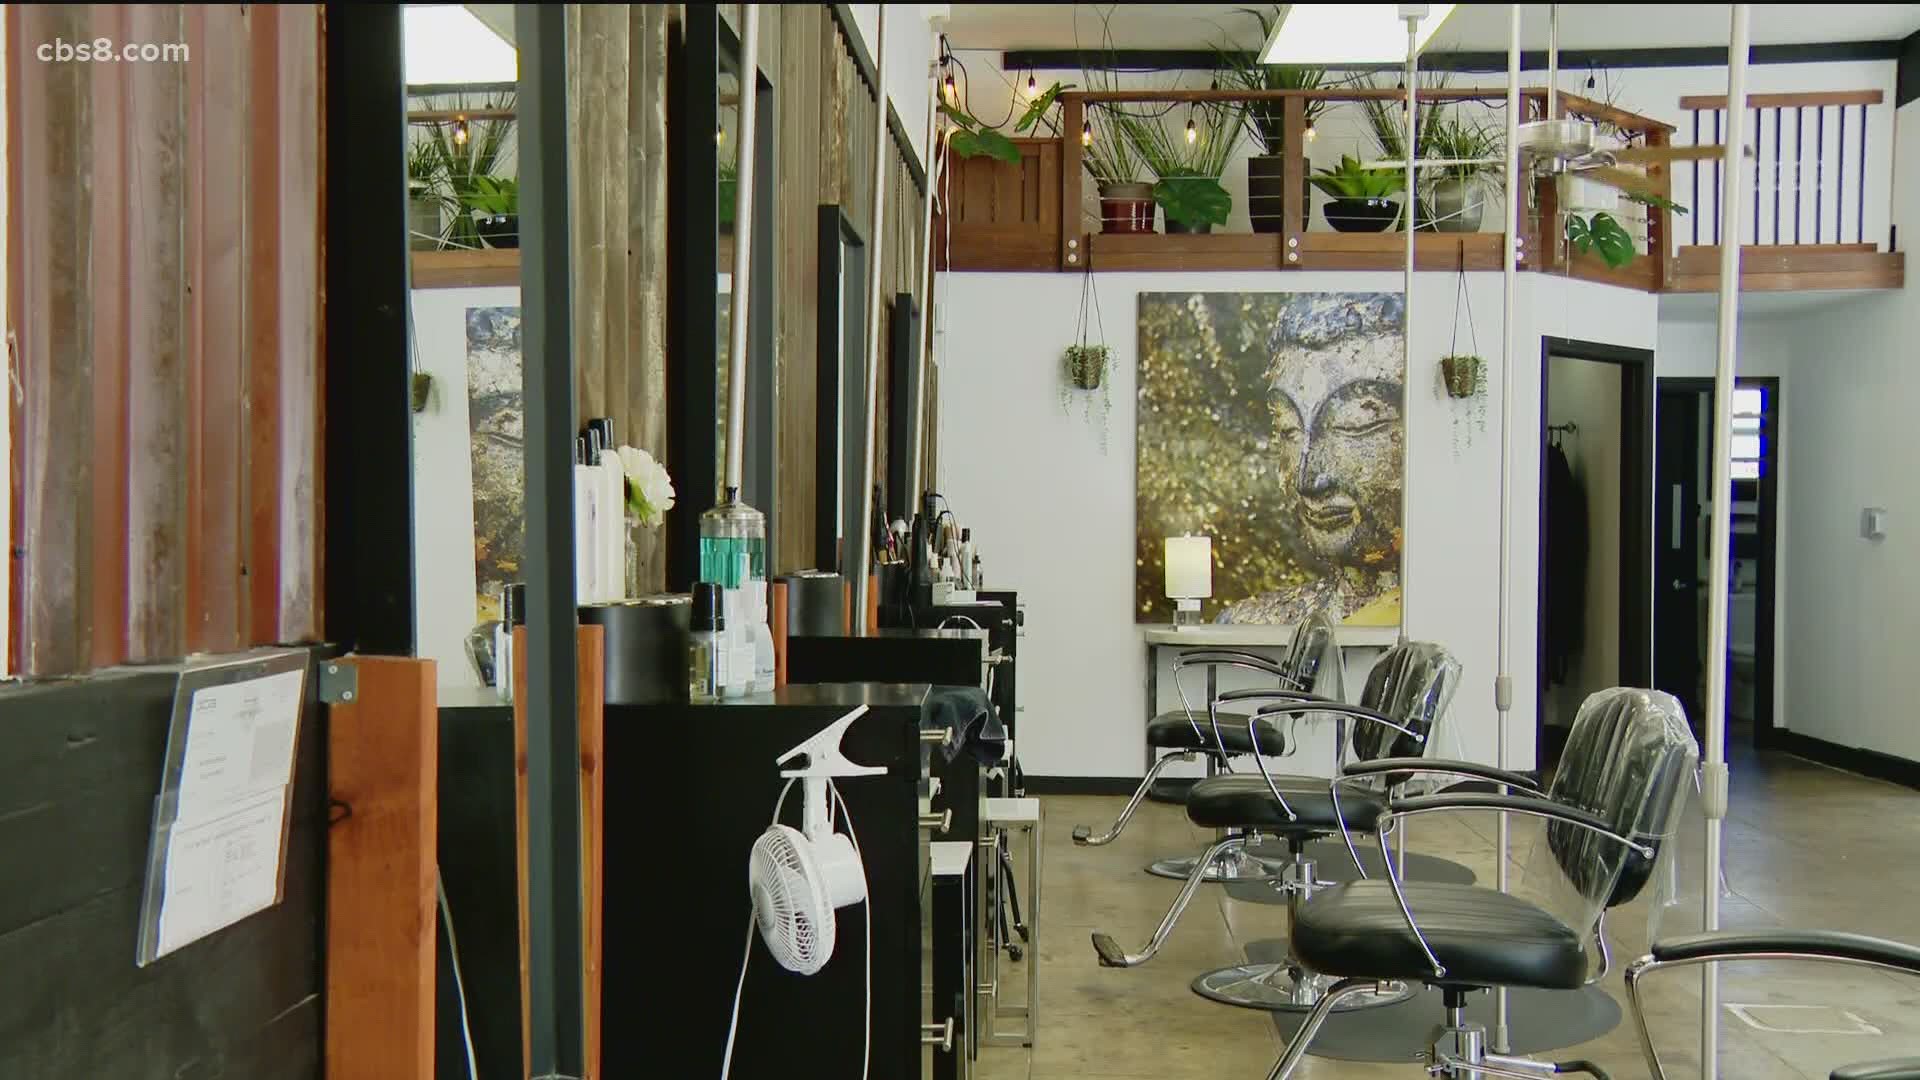 At some salons, there will be no indoor waiting area, and services will be offered by appointment only.